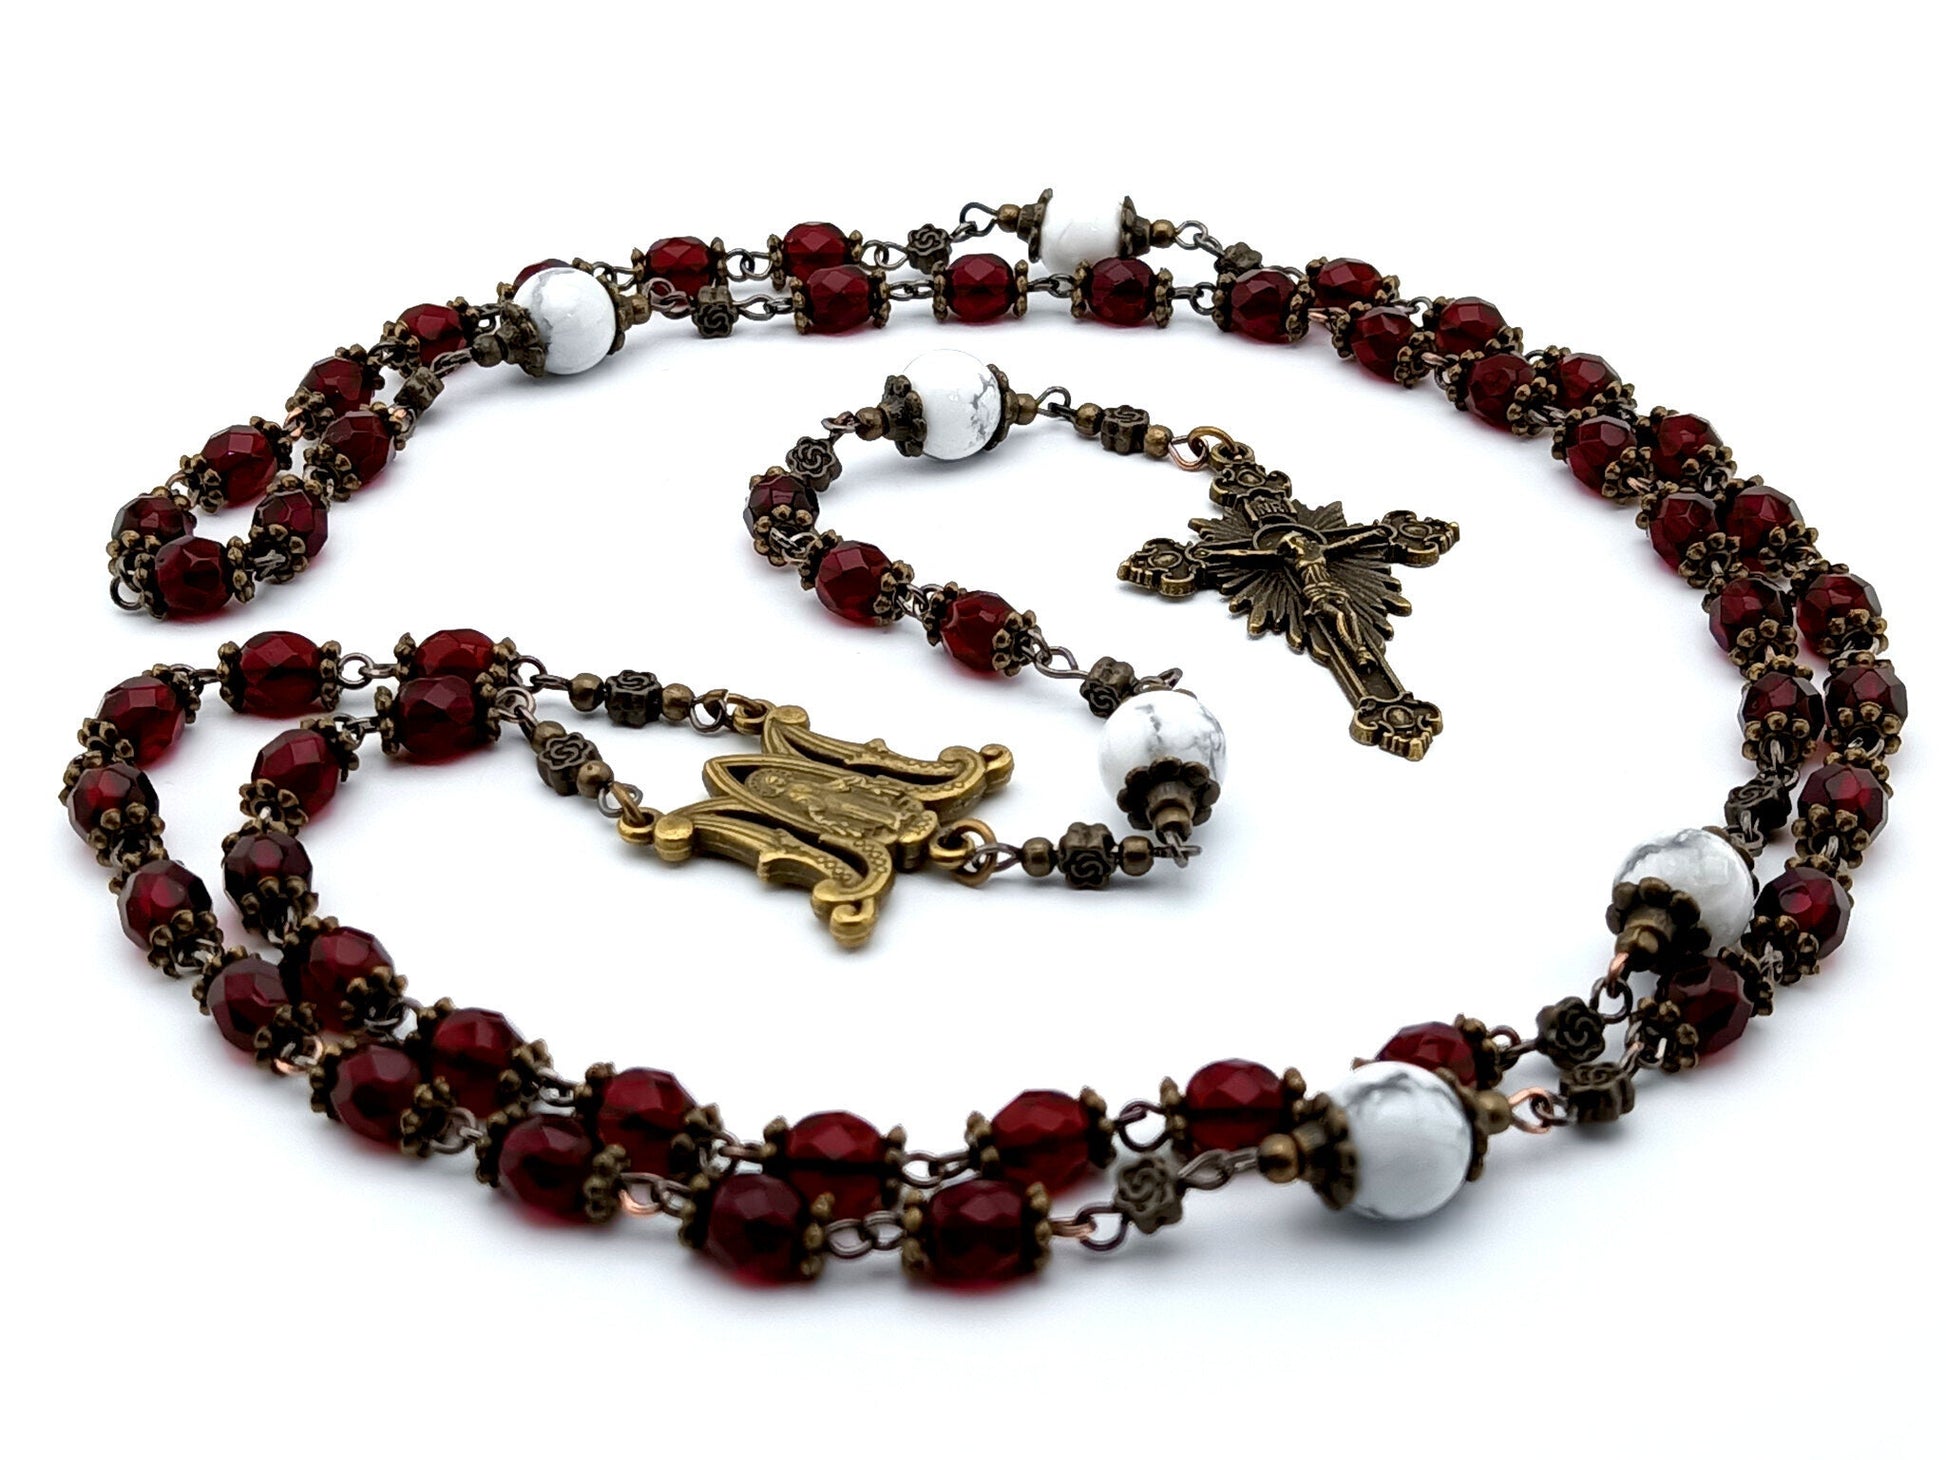 Miraculous medal unique rosary beads with red faceted glass beads, bronze sunburst crucifix, metal centre medal and white howlite pater beads.